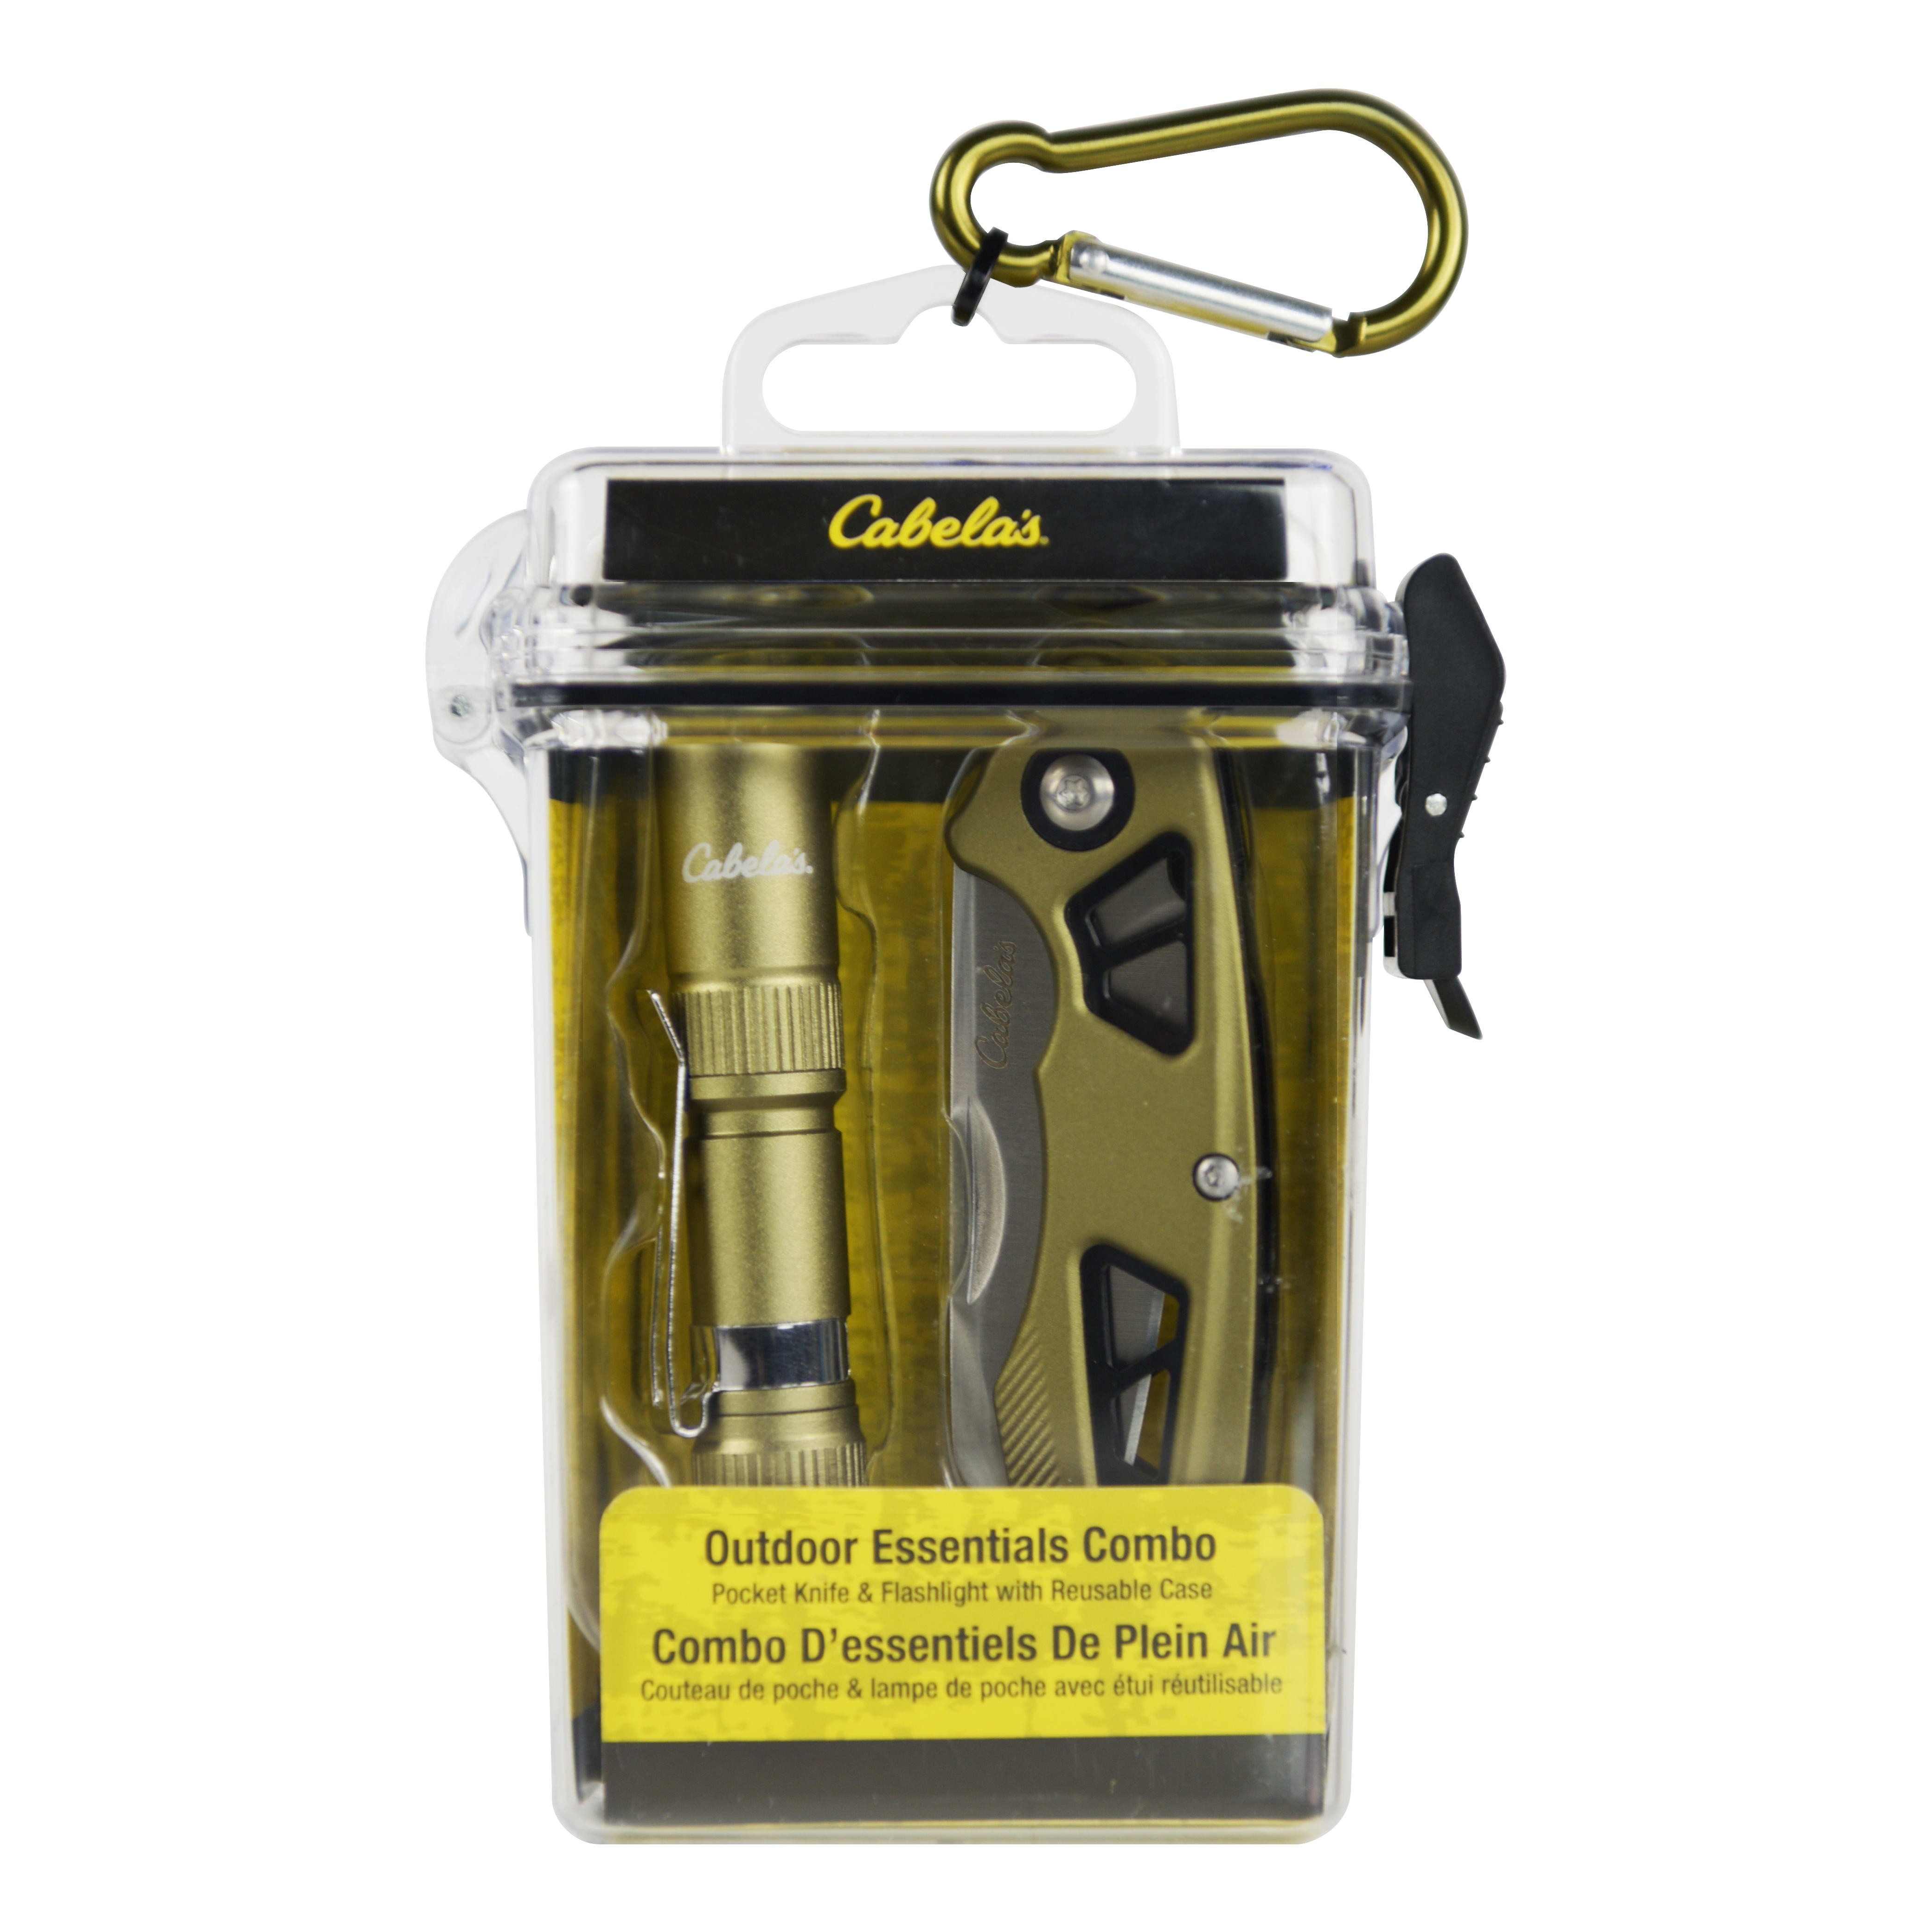 Cabela's Knife and Flashlight Combo with Waterproof Case - Olive